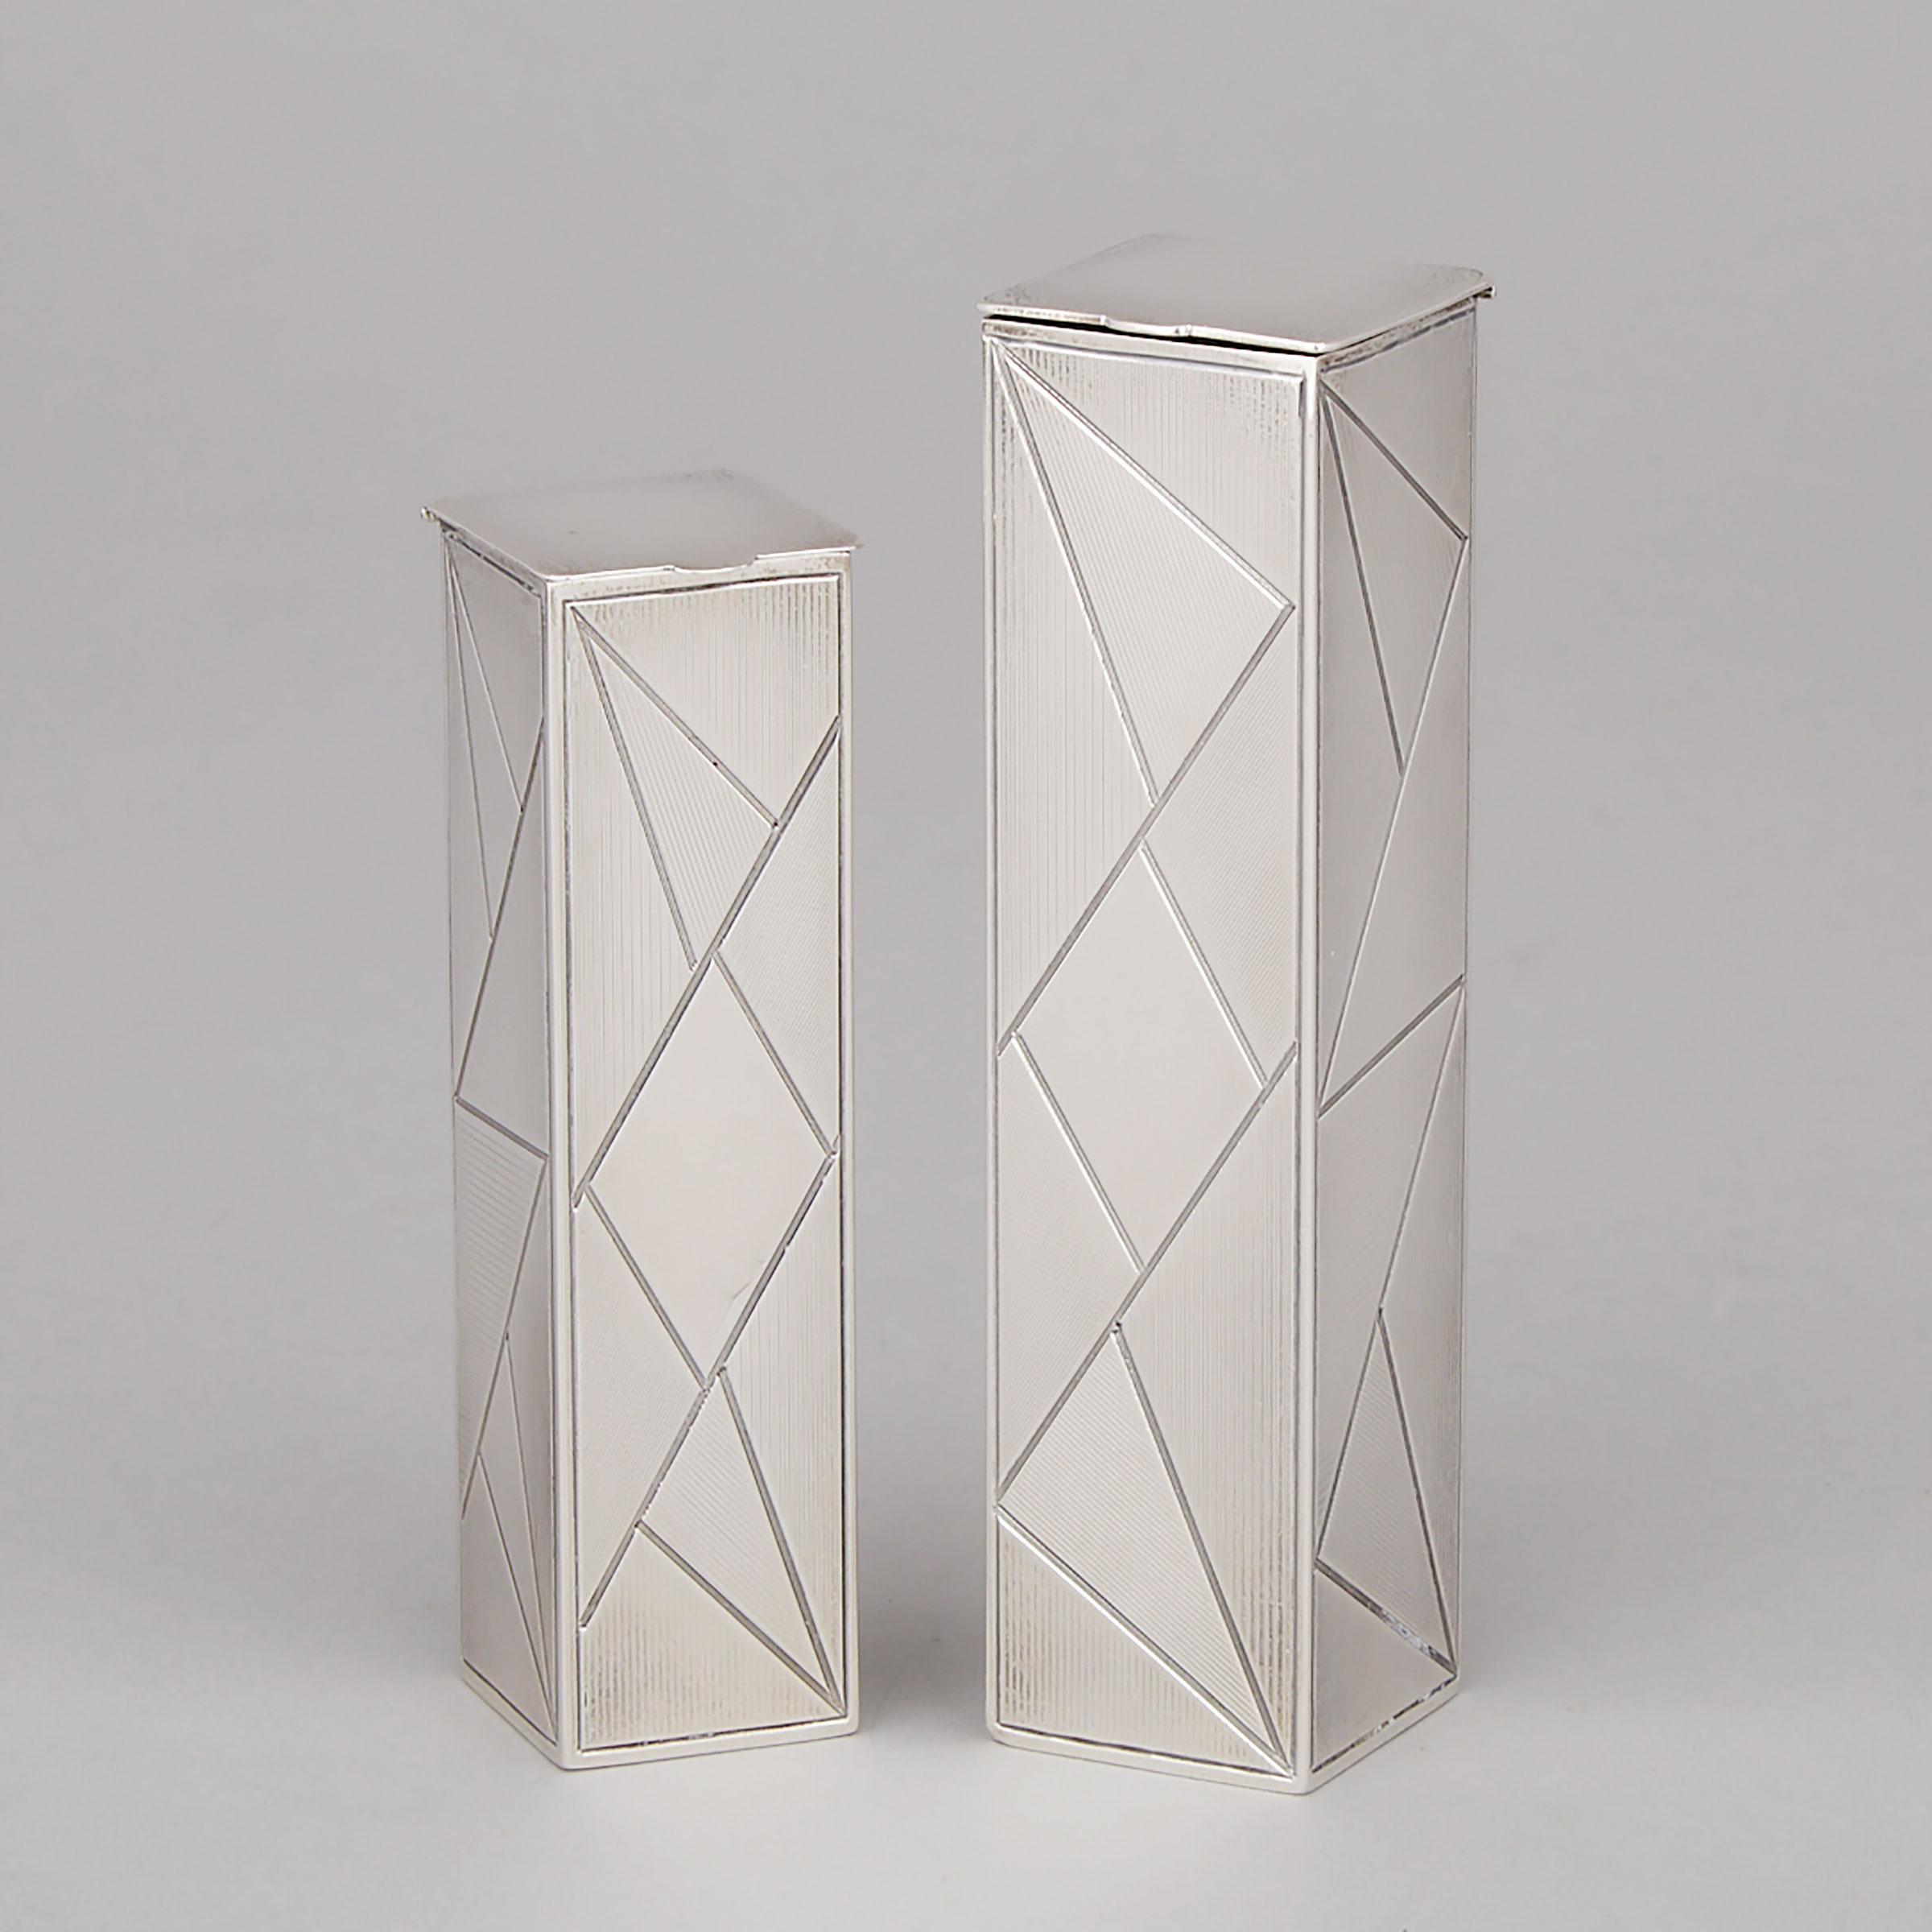 Two American Silver Rectangular Boxes, International Silver Co., Meriden, Ct., 20th century